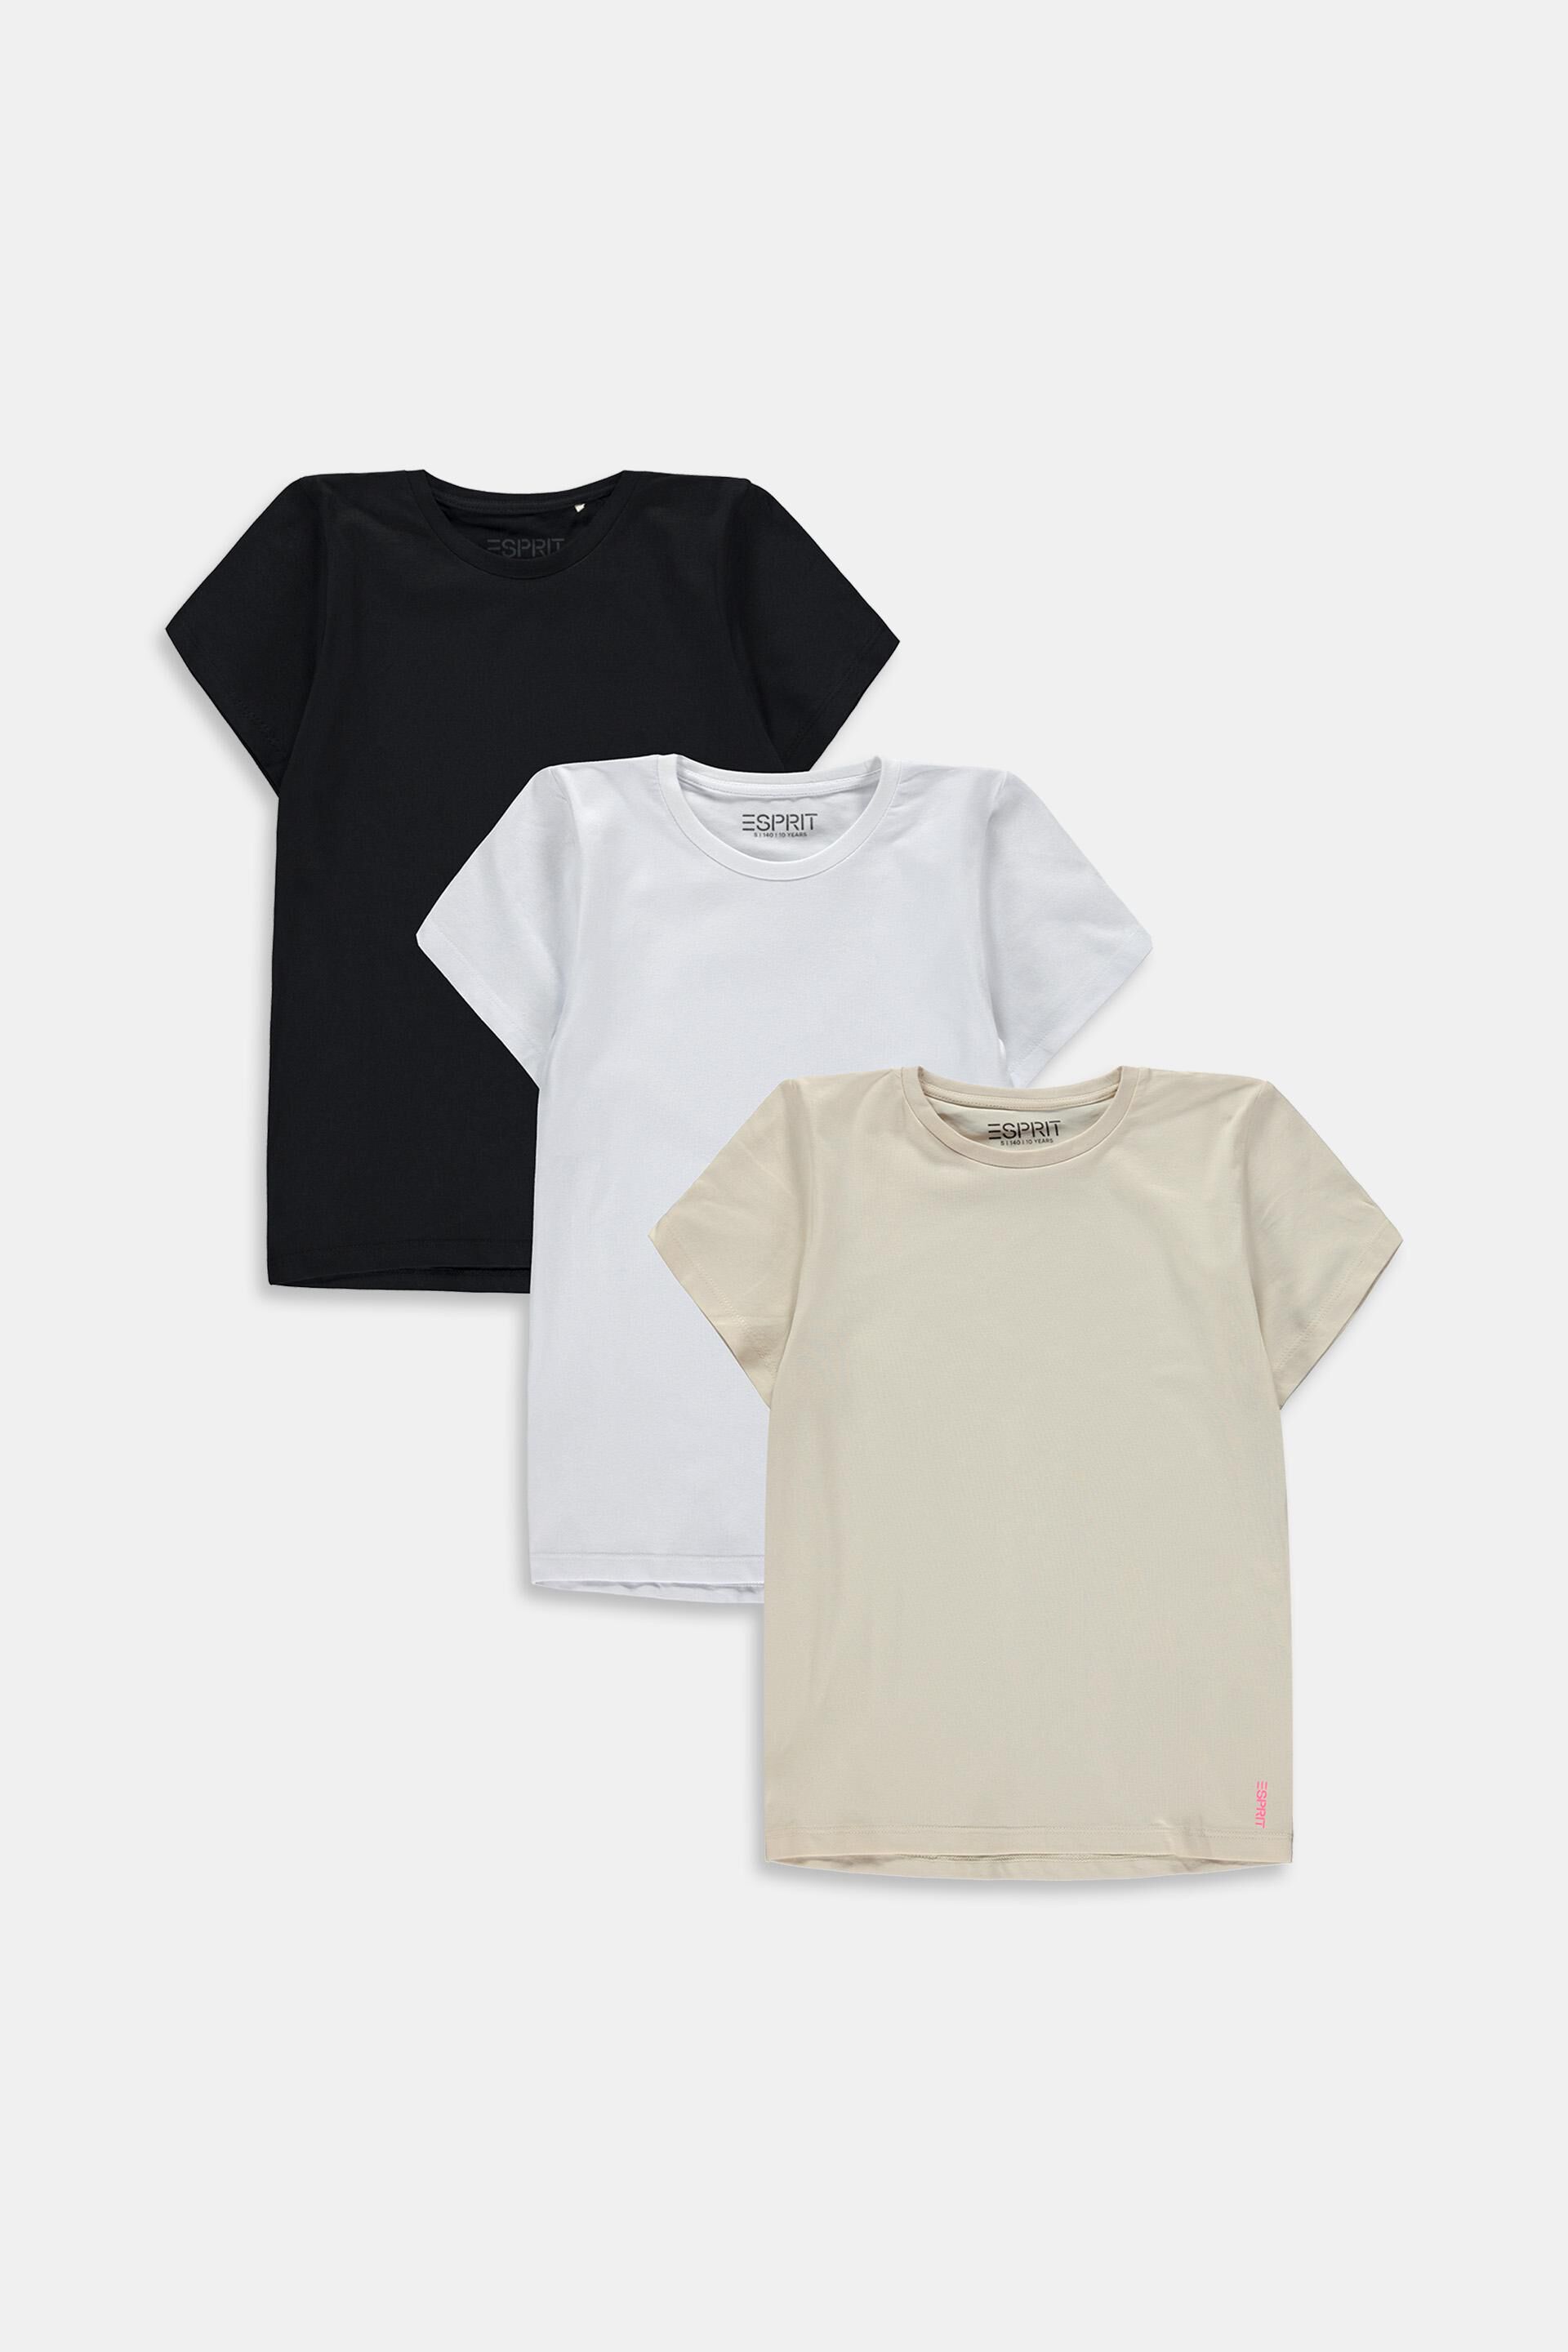 Esprit of 3-pack t-shirts